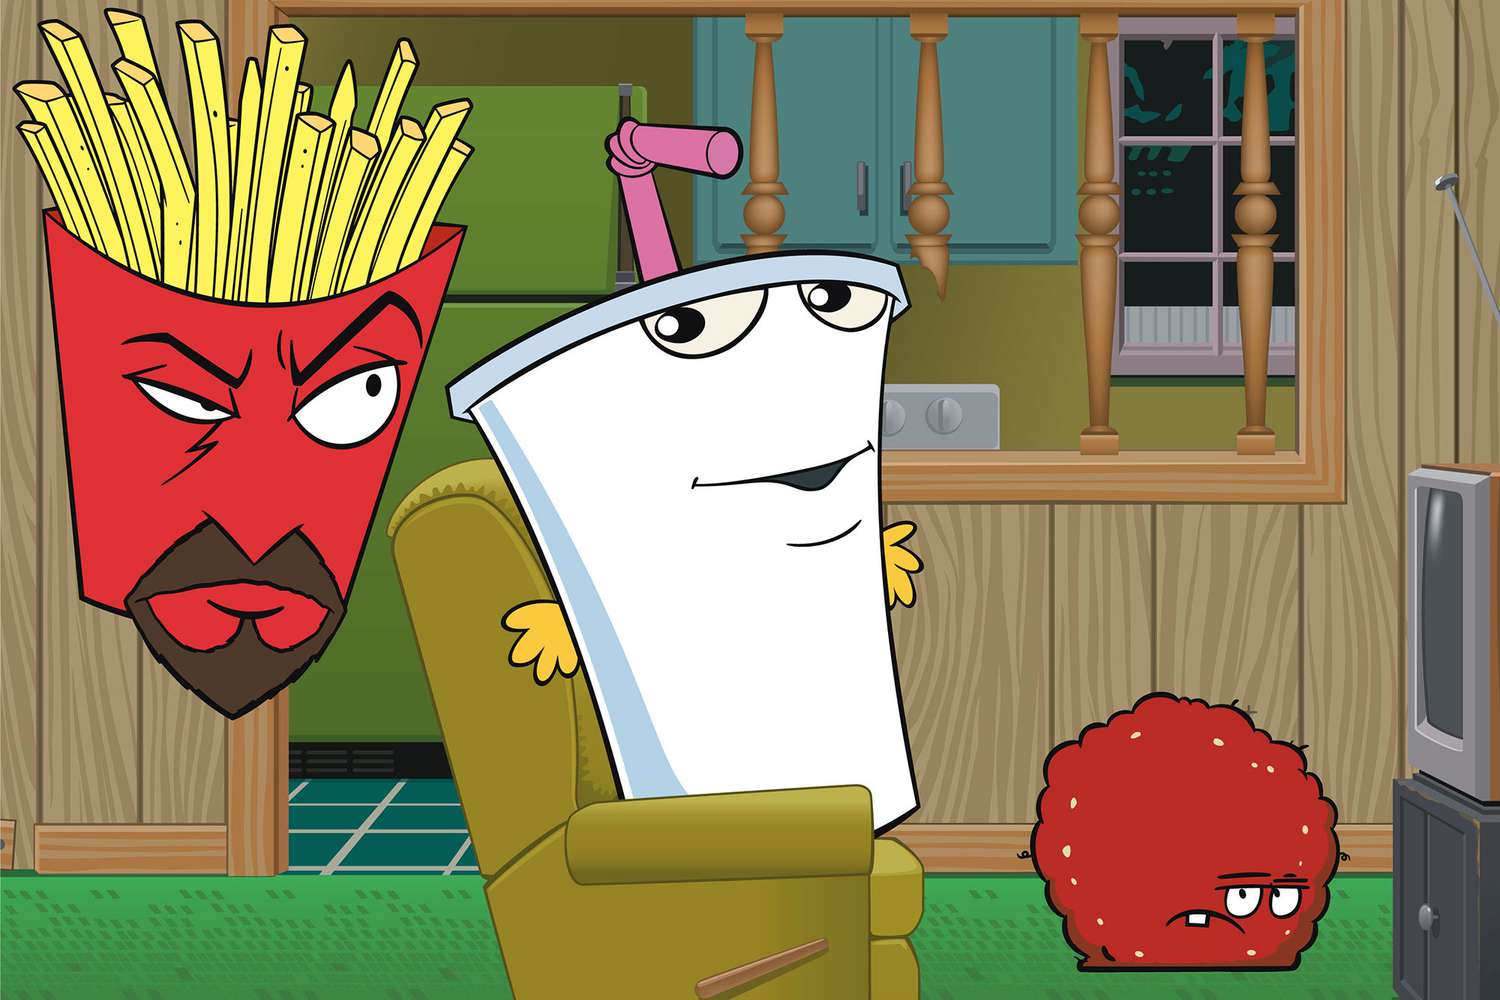 AQUA TEEN HUNGER FORCE COLON MOVIE FILM FOR THEATERS (2007) Frylock, Master Shake and Meatwad